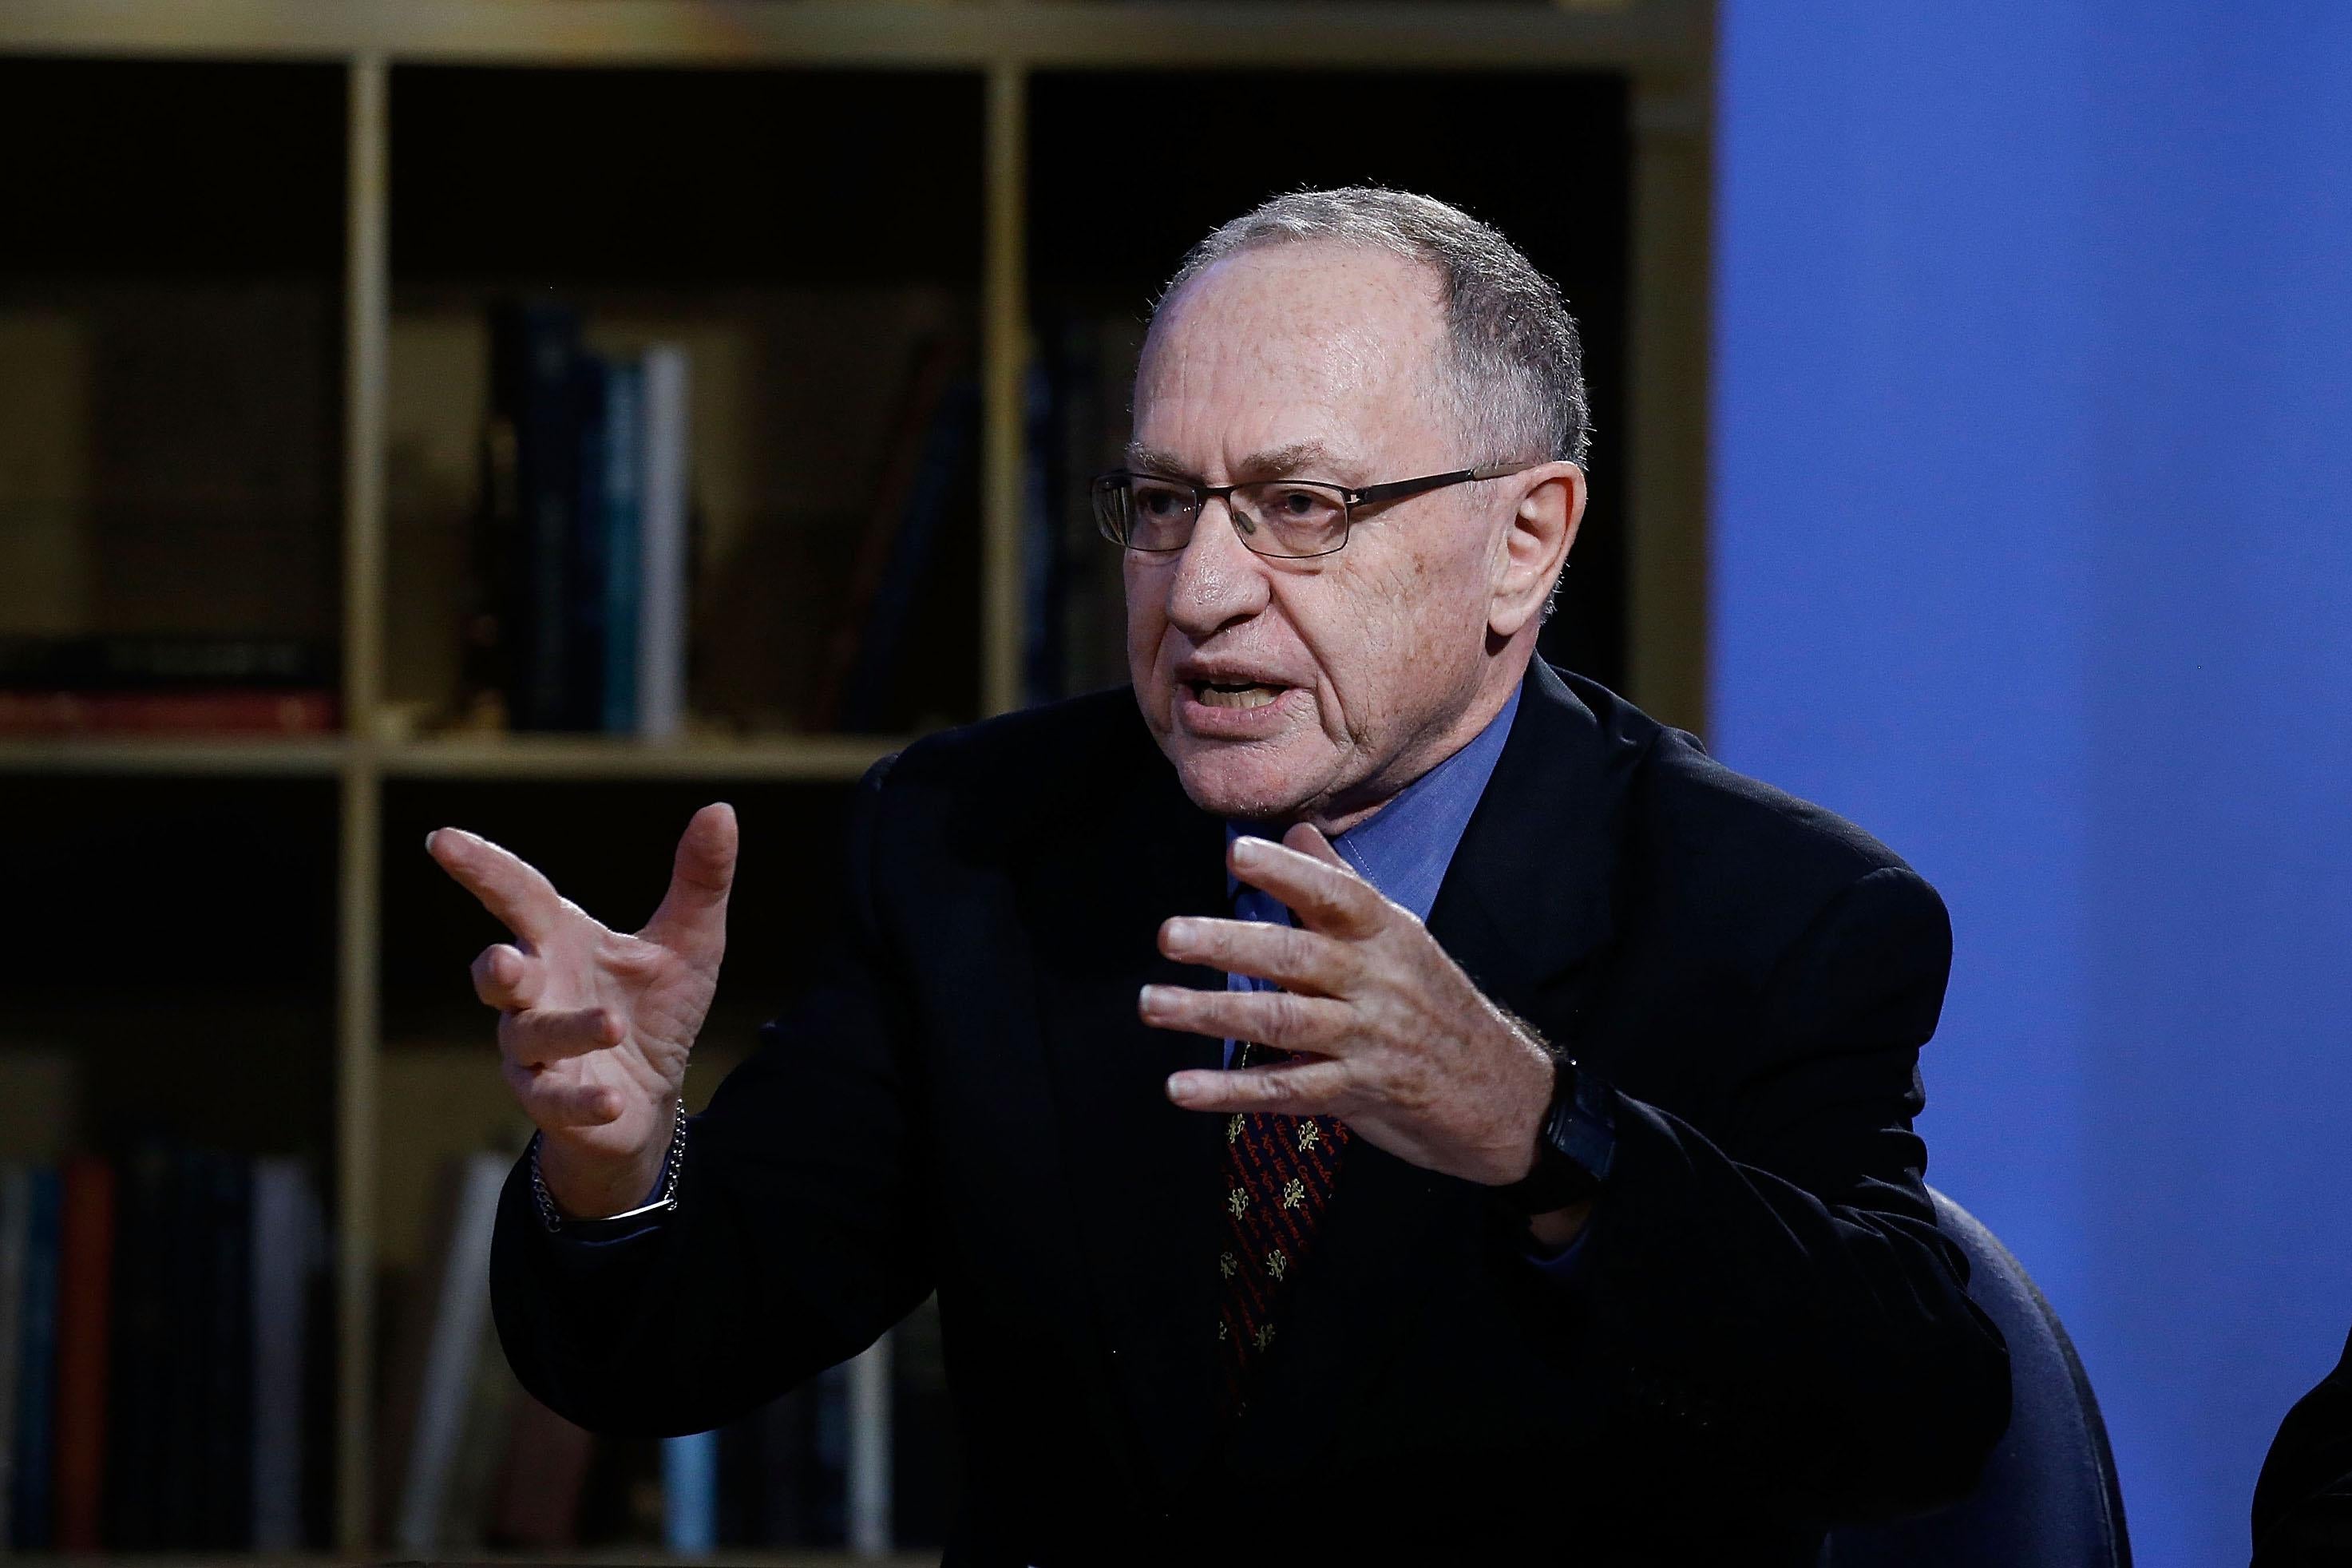 Alan Dershowitz at an event on Feb. 3, 2016, in New York City.